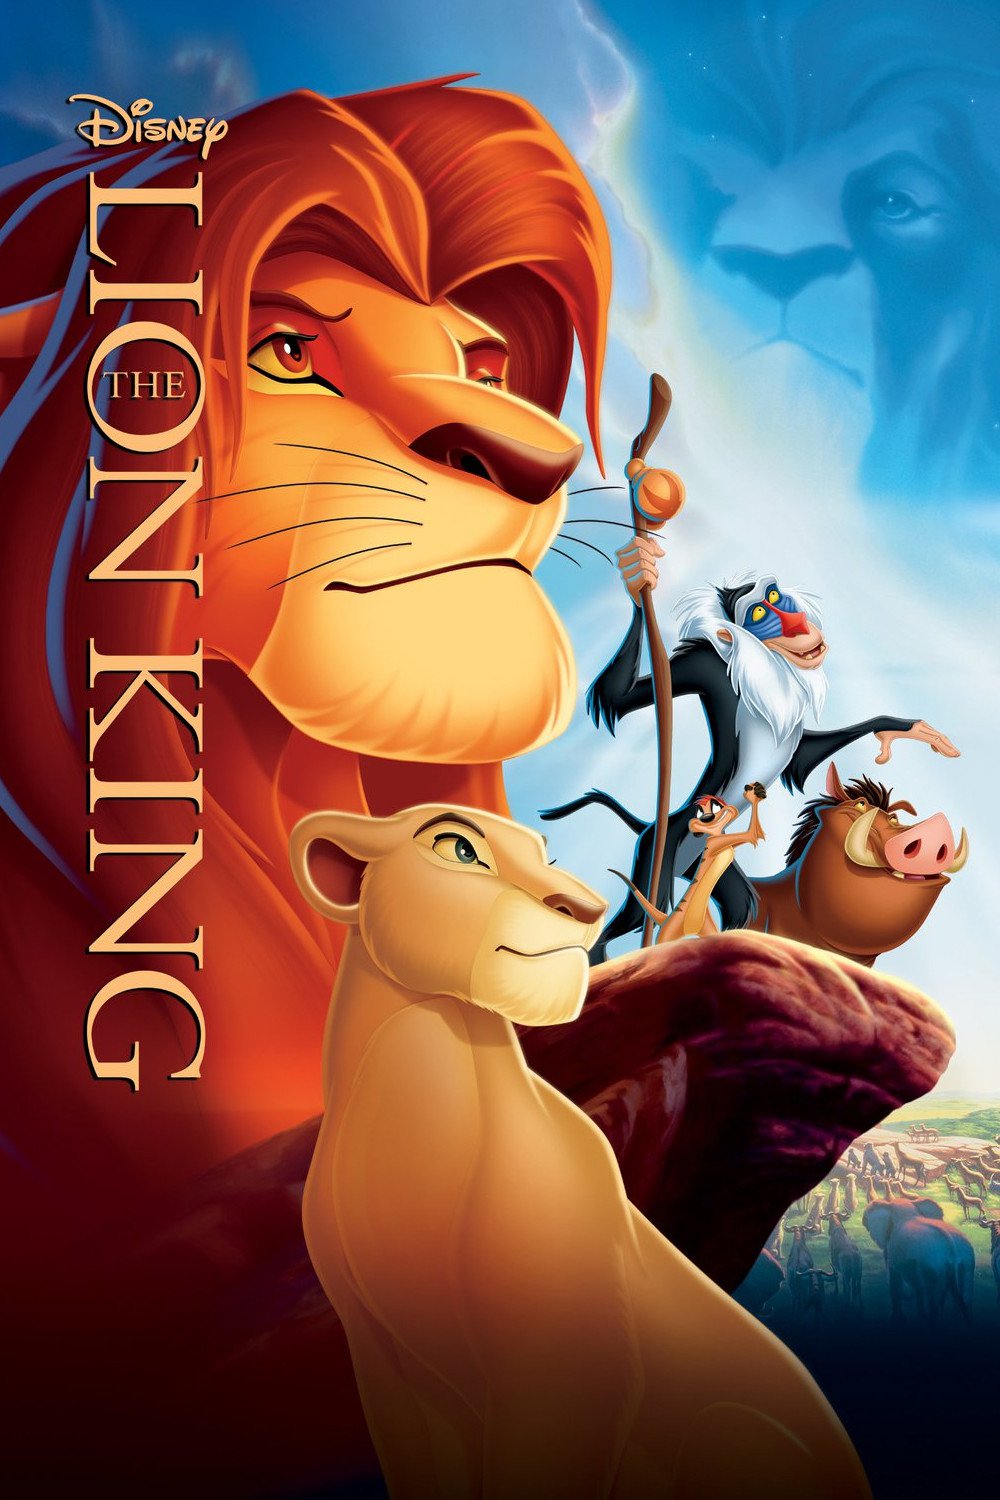 "")1994The Lion King (